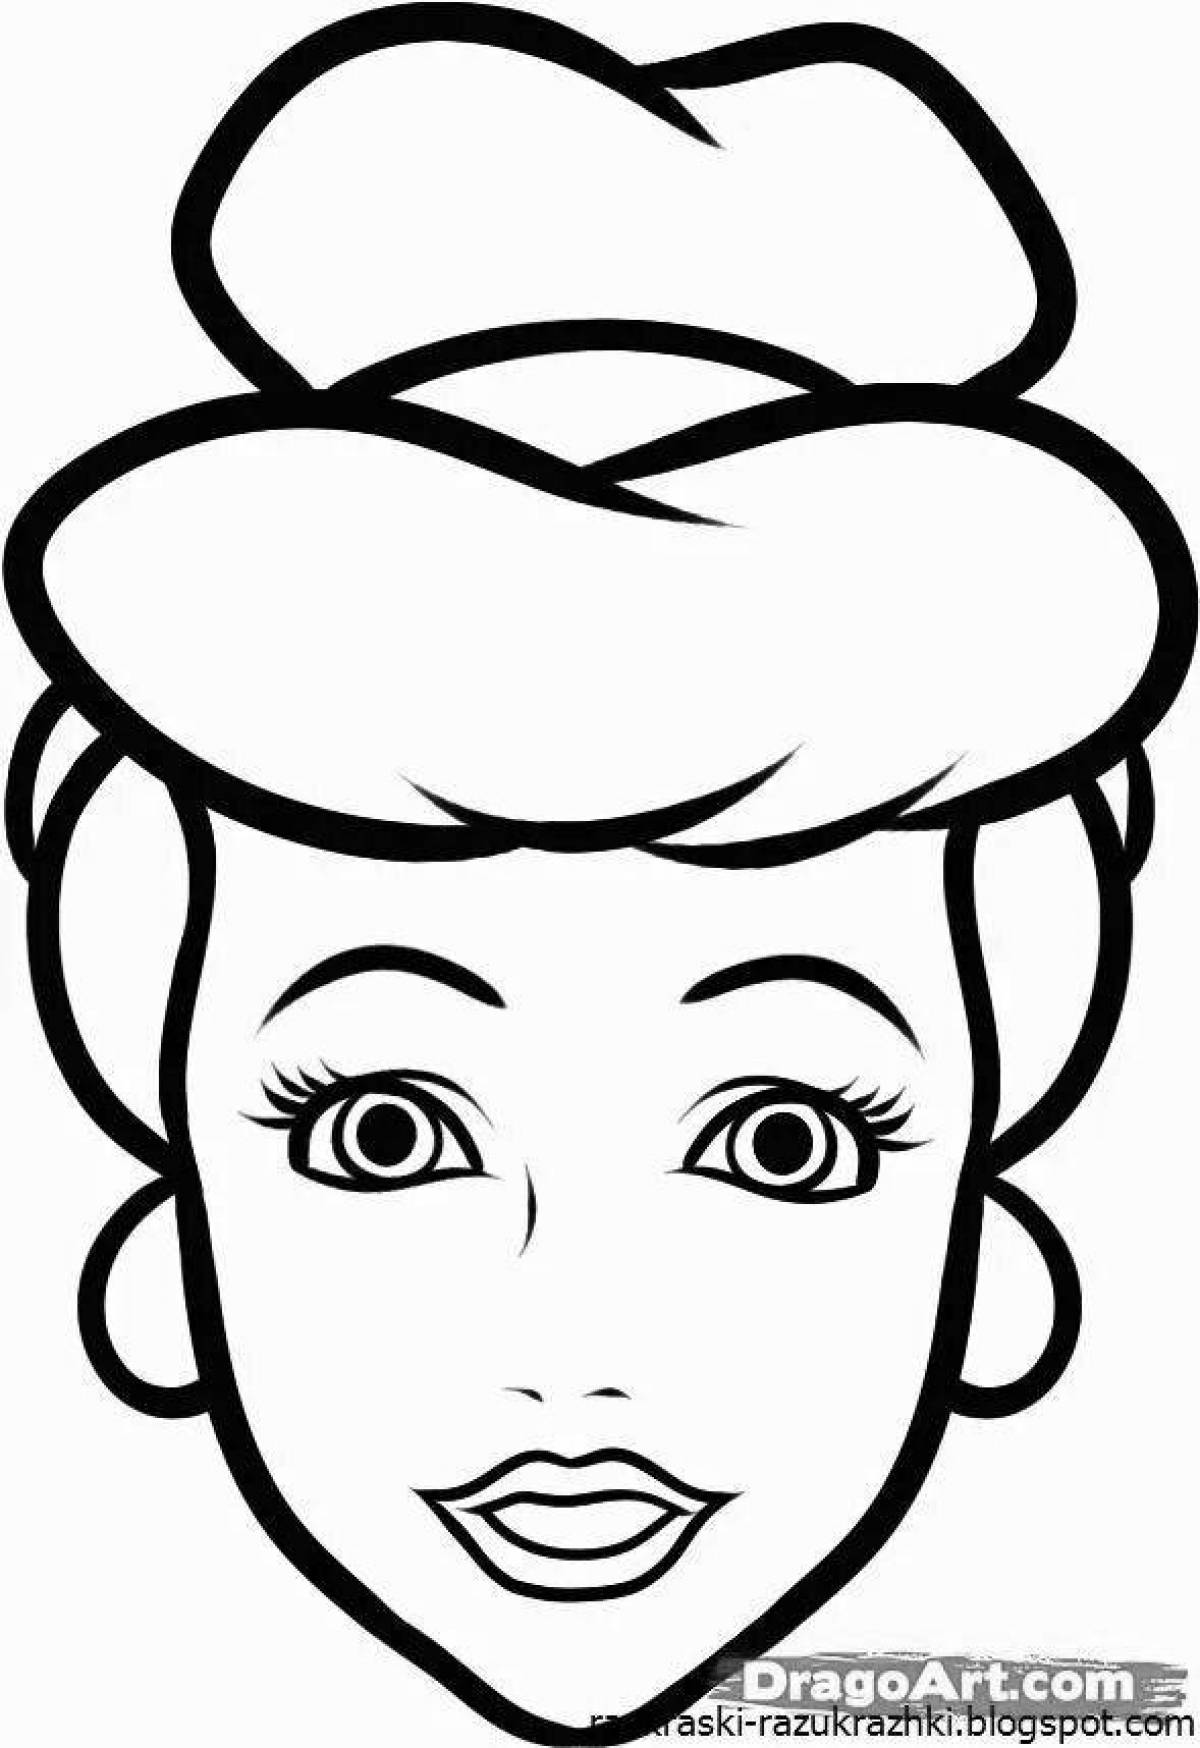 Charming head coloring page